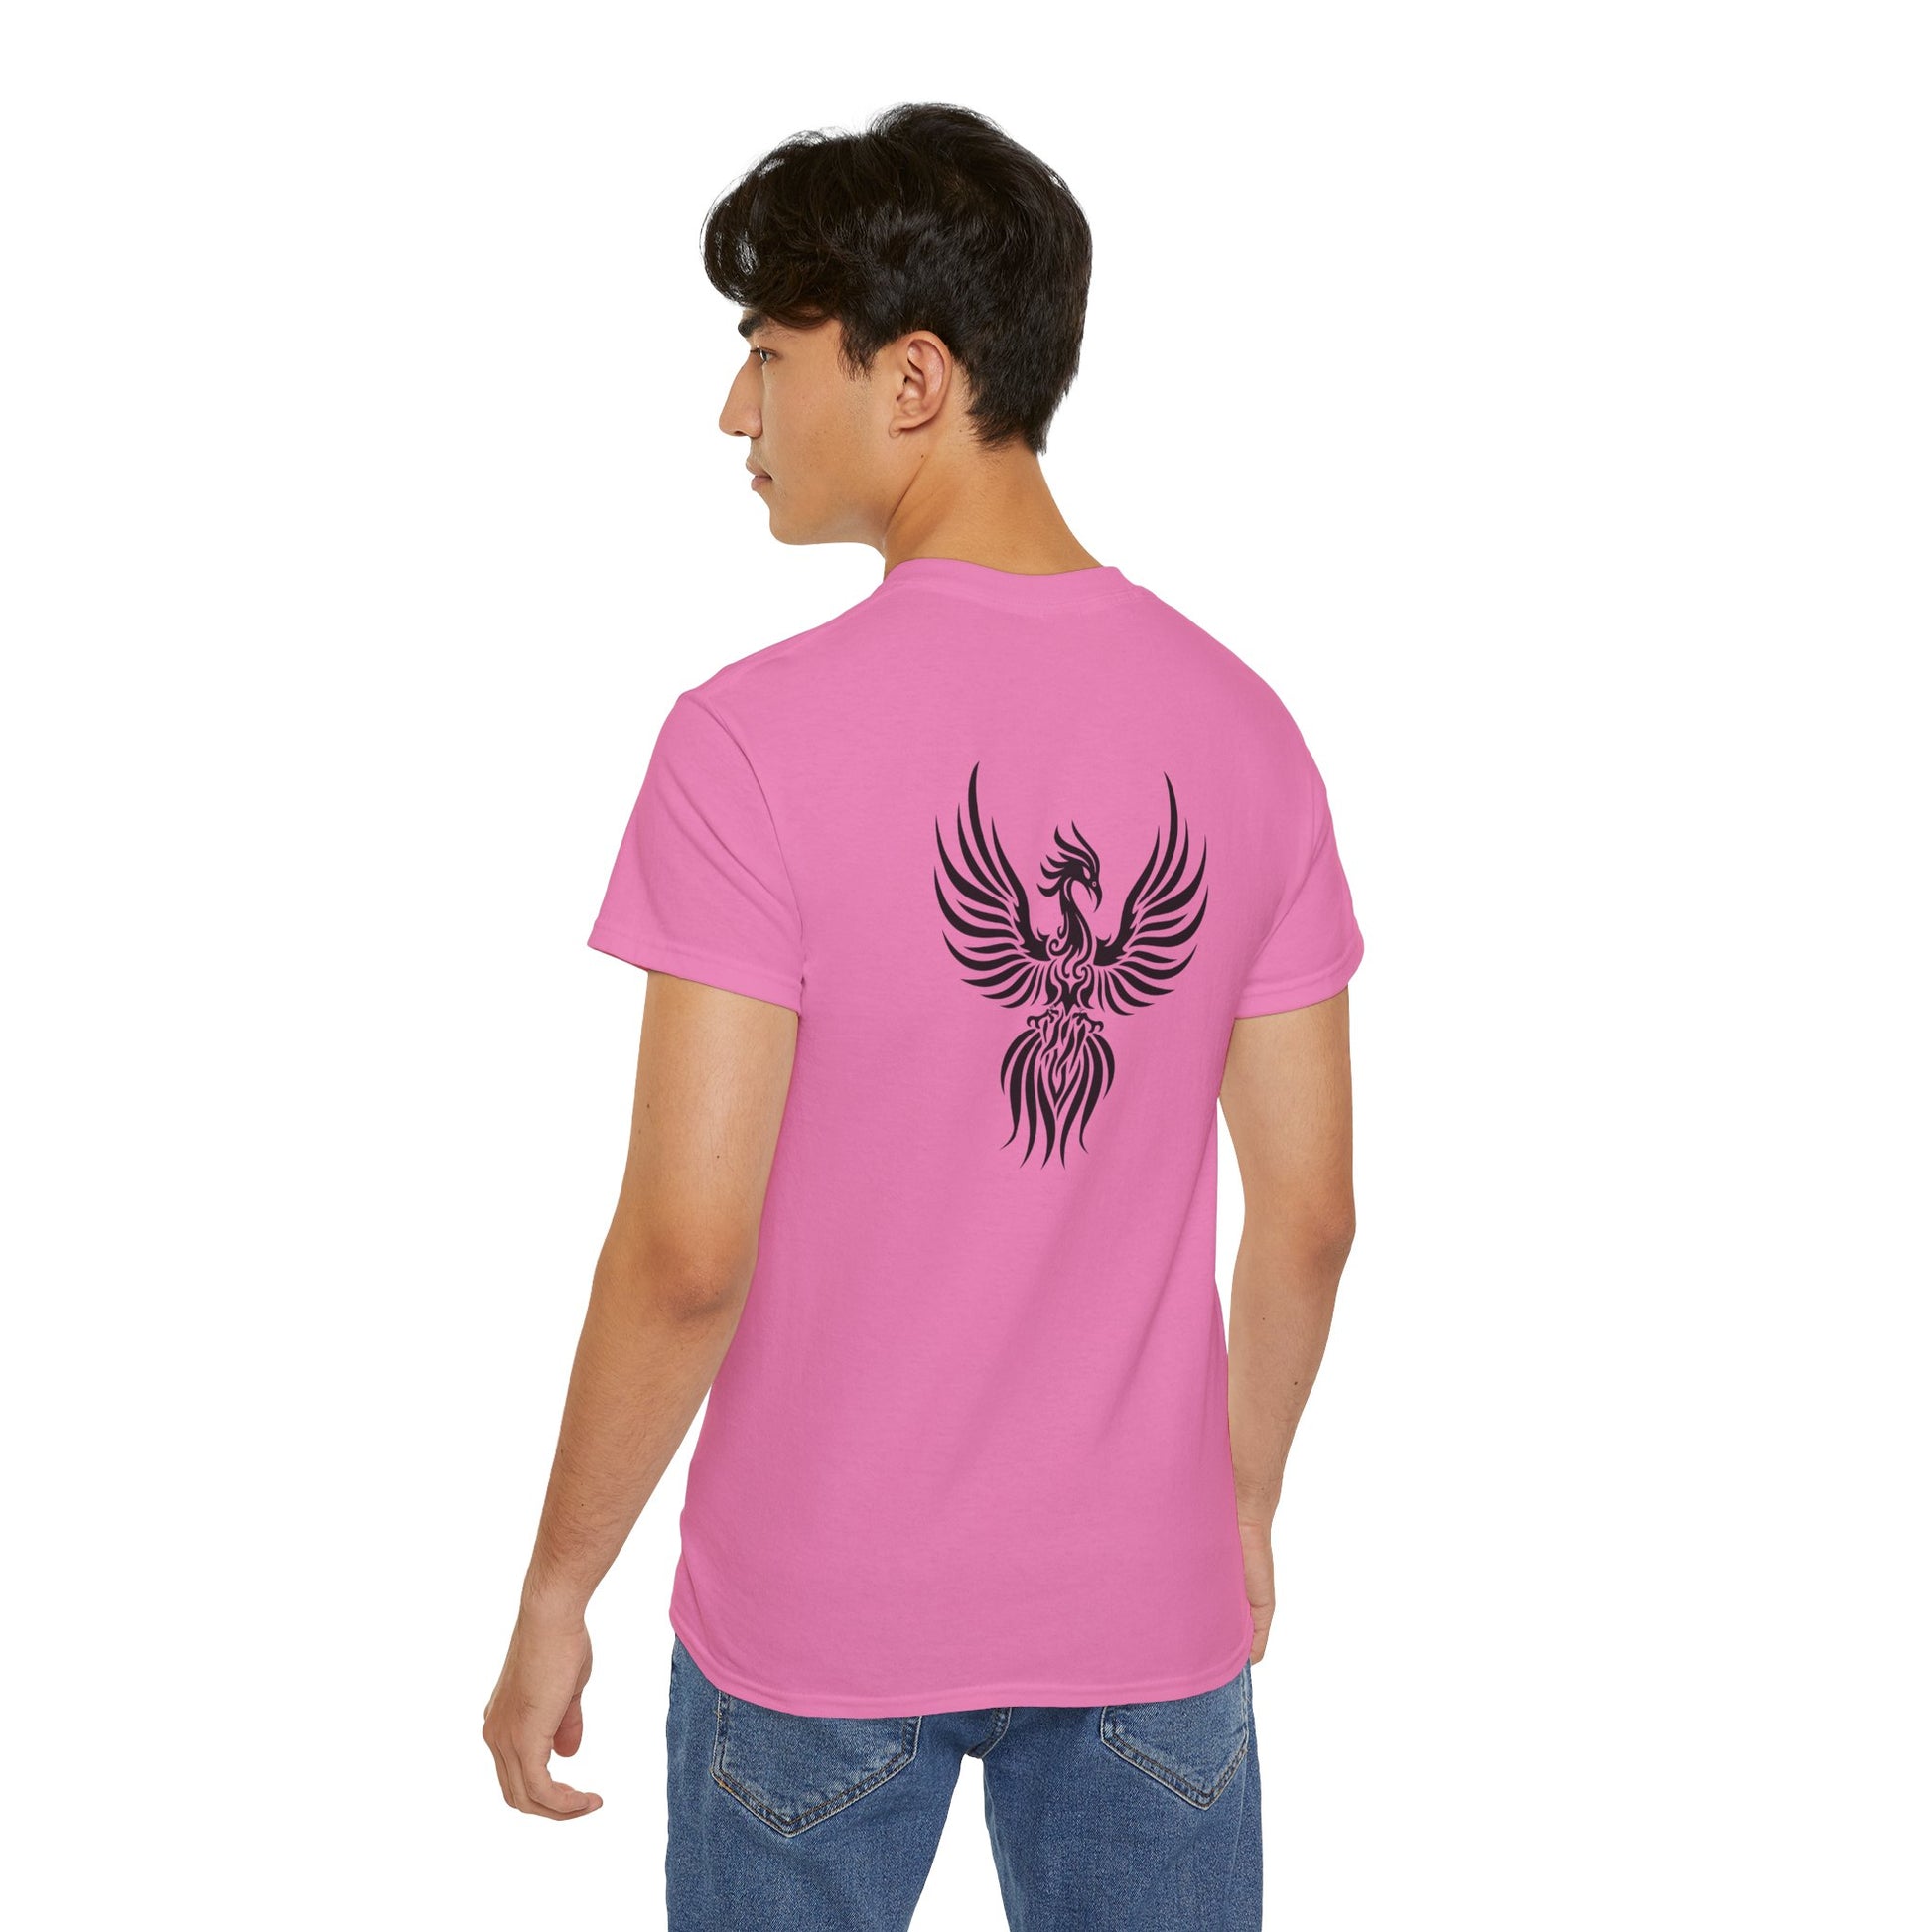 TESTED BY FIRE FAITH EMERGES STRONGER Unisex Christian Ultra Cotton Tee Printify